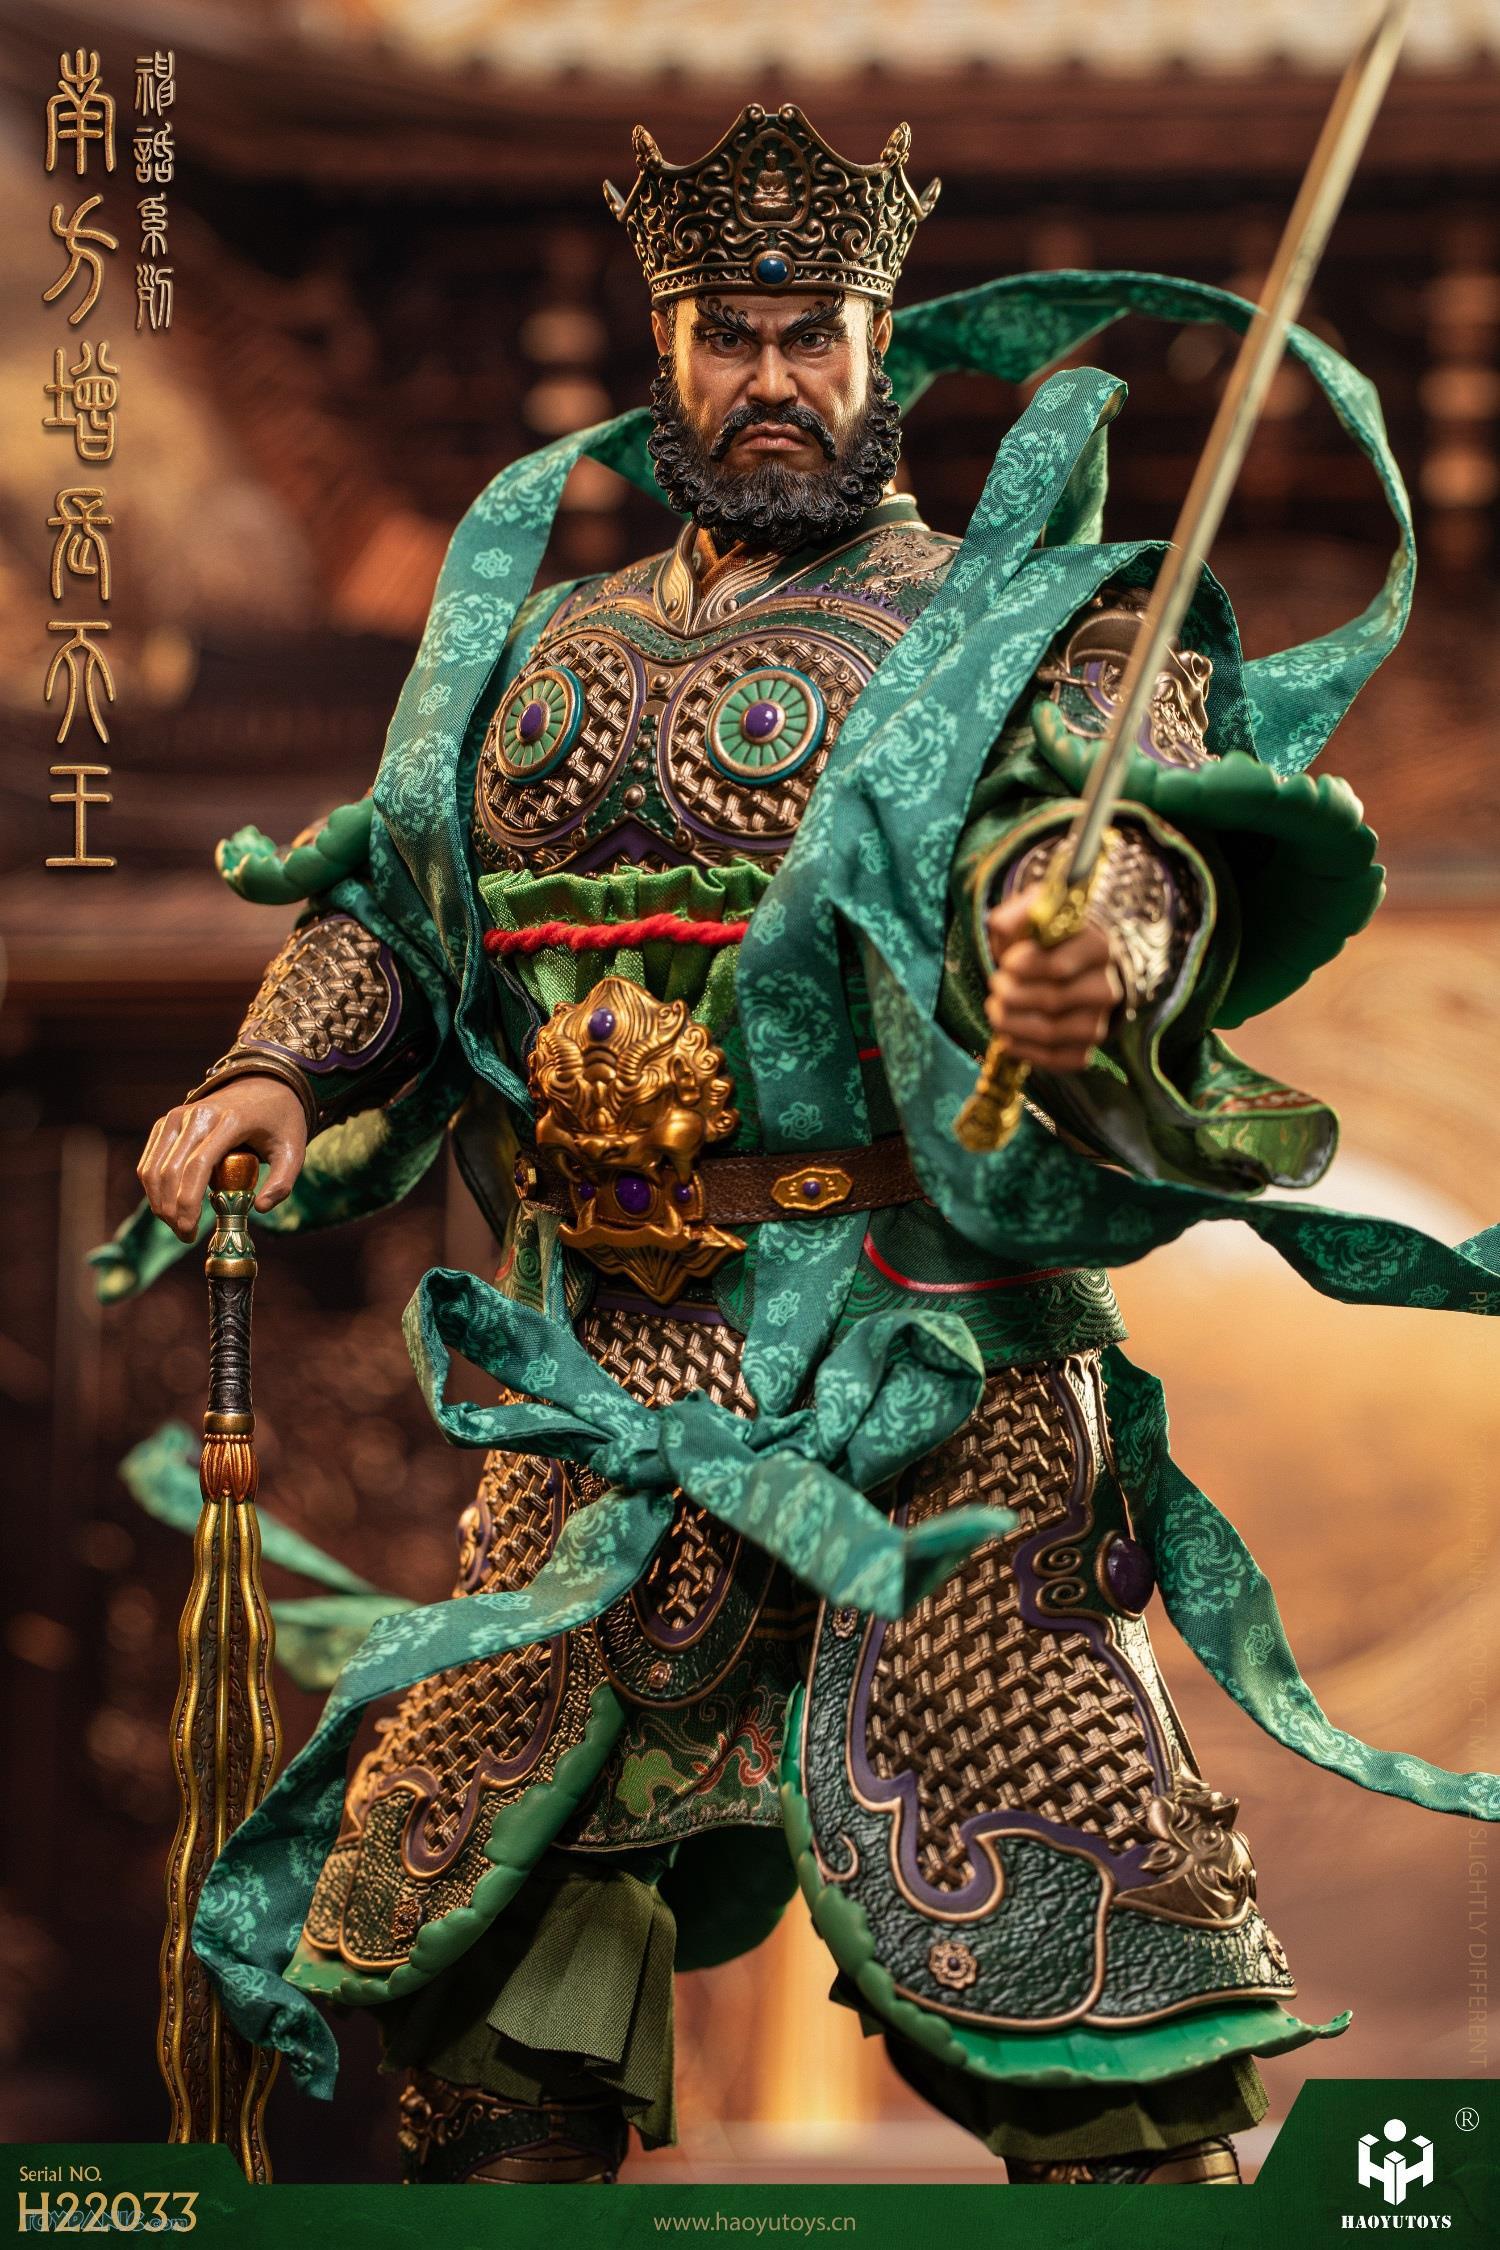 mythseries - NEW PRODUCT: HaoYuToys 1/6 Myth Series Southern Growth King 212202451837PM_263366